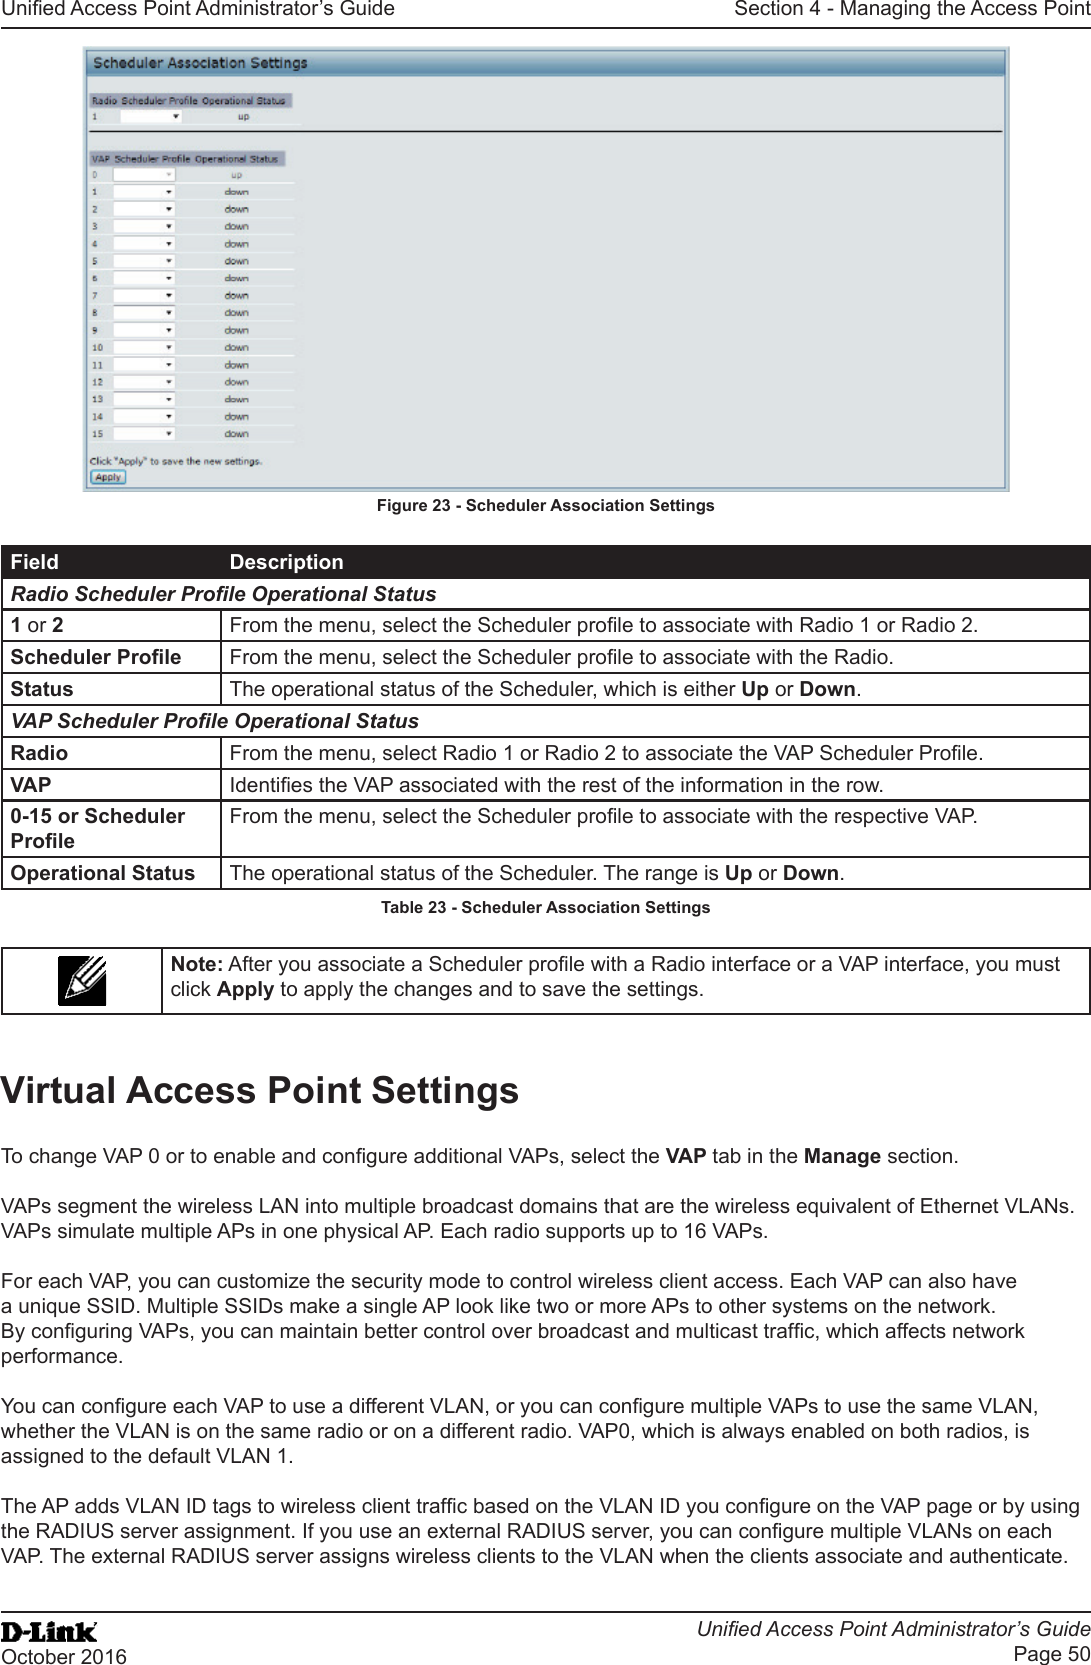 Unied Access Point Administrator’s GuideUnied Access Point Administrator’s GuidePage 50October 2016Section 4 - Managing the Access PointFigure 23 - Scheduler Association SettingsField DescriptionRadio Scheduler Prole Operational Status1 or 2  From the menu, select the Scheduler prole to associate with Radio 1 or Radio 2.Scheduler Prole From the menu, select the Scheduler prole to associate with the Radio.Status The operational status of the Scheduler, which is either Up or Down.VAP Scheduler Prole Operational StatusRadio From the menu, select Radio 1 or Radio 2 to associate the VAP Scheduler Prole.VAP Identies the VAP associated with the rest of the information in the row. 0-15 or Scheduler ProleFrom the menu, select the Scheduler prole to associate with the respective VAP.Operational Status The operational status of the Scheduler. The range is Up or Down.Table 23 - Scheduler Association SettingsNote: After you associate a Scheduler prole with a Radio interface or a VAP interface, you must click Apply to apply the changes and to save the settings.Virtual Access Point SettingsTo change VAP 0 or to enable and congure additional VAPs, select the VAP tab in the Manage section.VAPs segment the wireless LAN into multiple broadcast domains that are the wireless equivalent of Ethernet VLANs. VAPs simulate multiple APs in one physical AP. Each radio supports up to 16 VAPs.For each VAP, you can customize the security mode to control wireless client access. Each VAP can also have a unique SSID. Multiple SSIDs make a single AP look like two or more APs to other systems on the network. By conguring VAPs, you can maintain better control over broadcast and multicast trafc, which affects network performance. You can congure each VAP to use a different VLAN, or you can congure multiple VAPs to use the same VLAN, whether the VLAN is on the same radio or on a different radio. VAP0, which is always enabled on both radios, is assigned to the default VLAN 1.The AP adds VLAN ID tags to wireless client trafc based on the VLAN ID you congure on the VAP page or by using the RADIUS server assignment. If you use an external RADIUS server, you can congure multiple VLANs on each VAP. The external RADIUS server assigns wireless clients to the VLAN when the clients associate and authenticate.